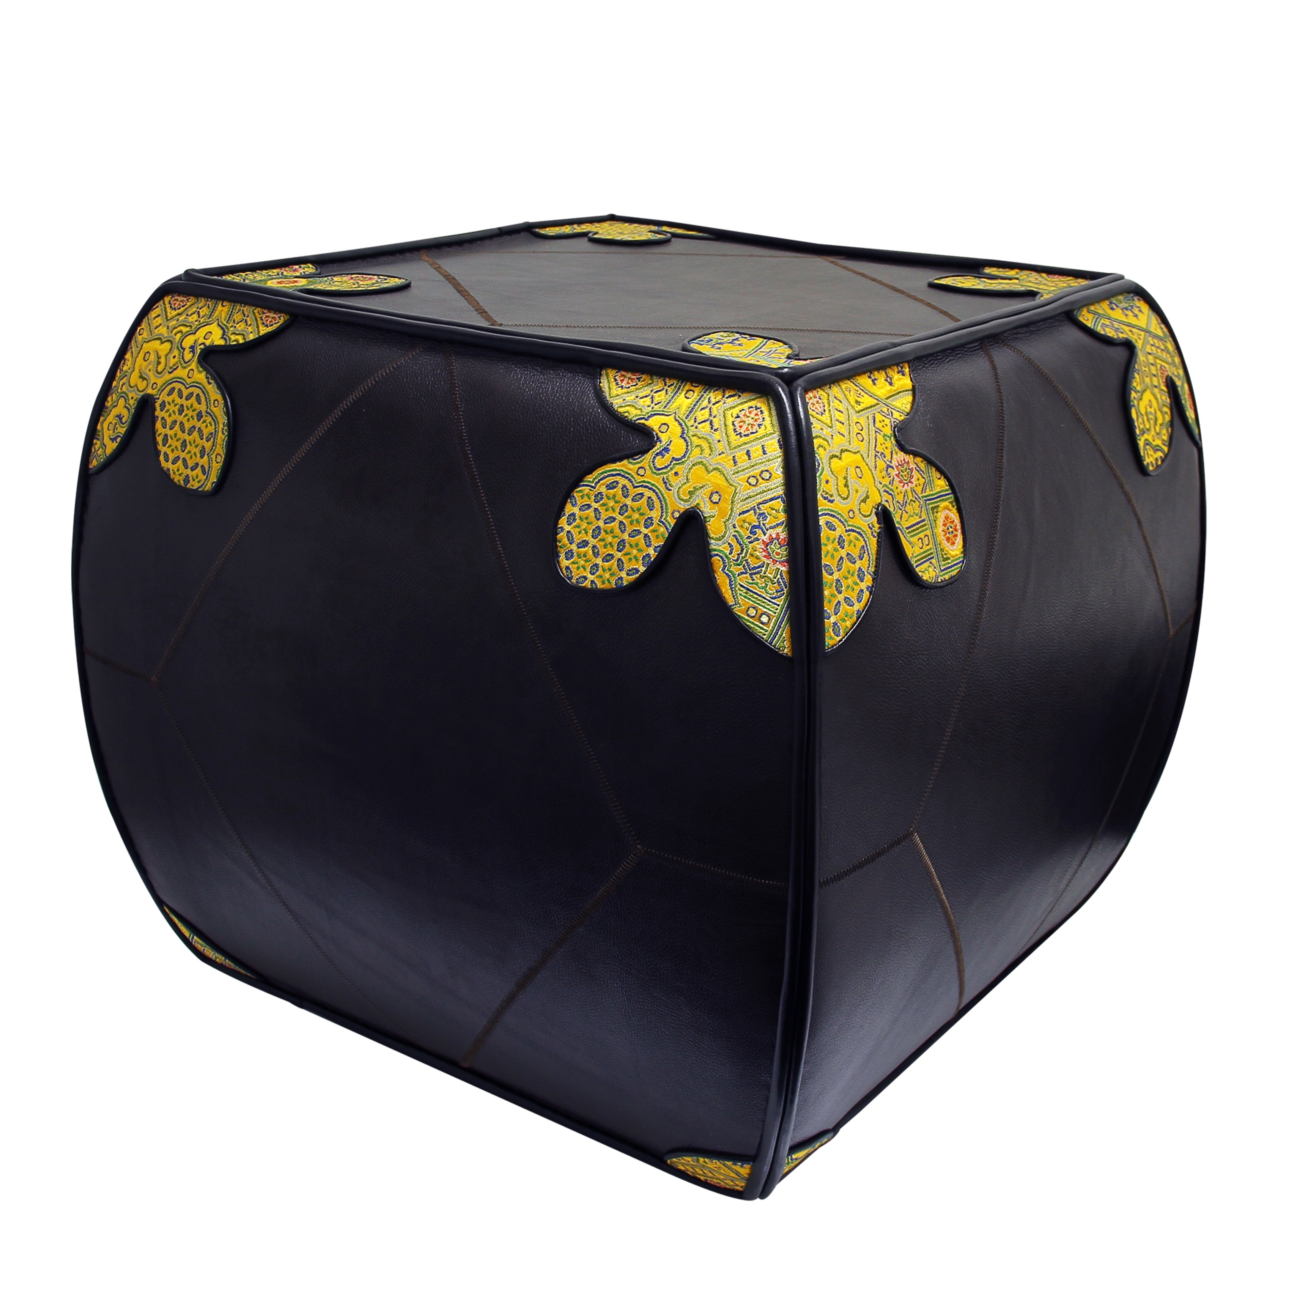 Brown Cow Leather Pouffe (stool) with Chinese SilK Brocade - Size - Large